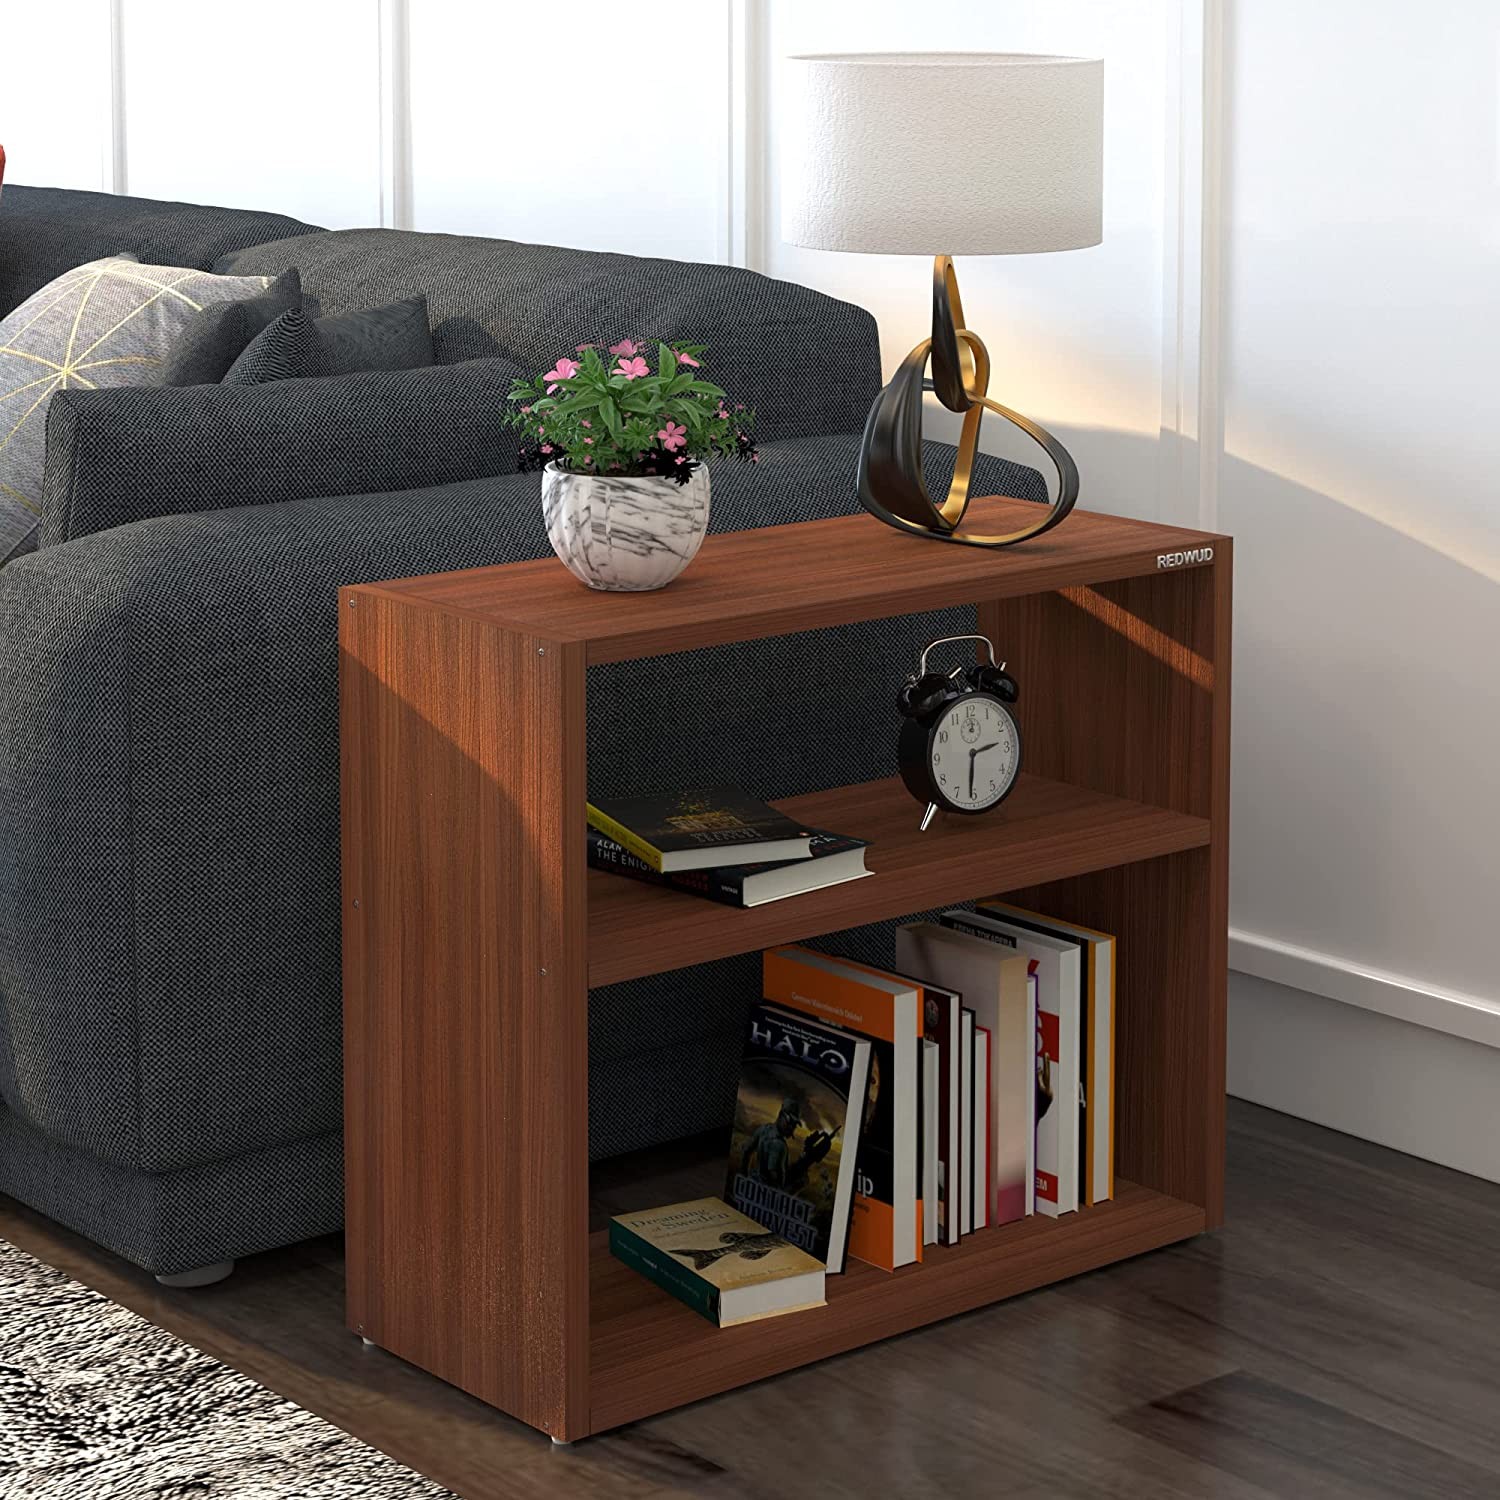 patricia-engineered-wood-bedside-table-end-table-walnut-rd-patricia-wnt